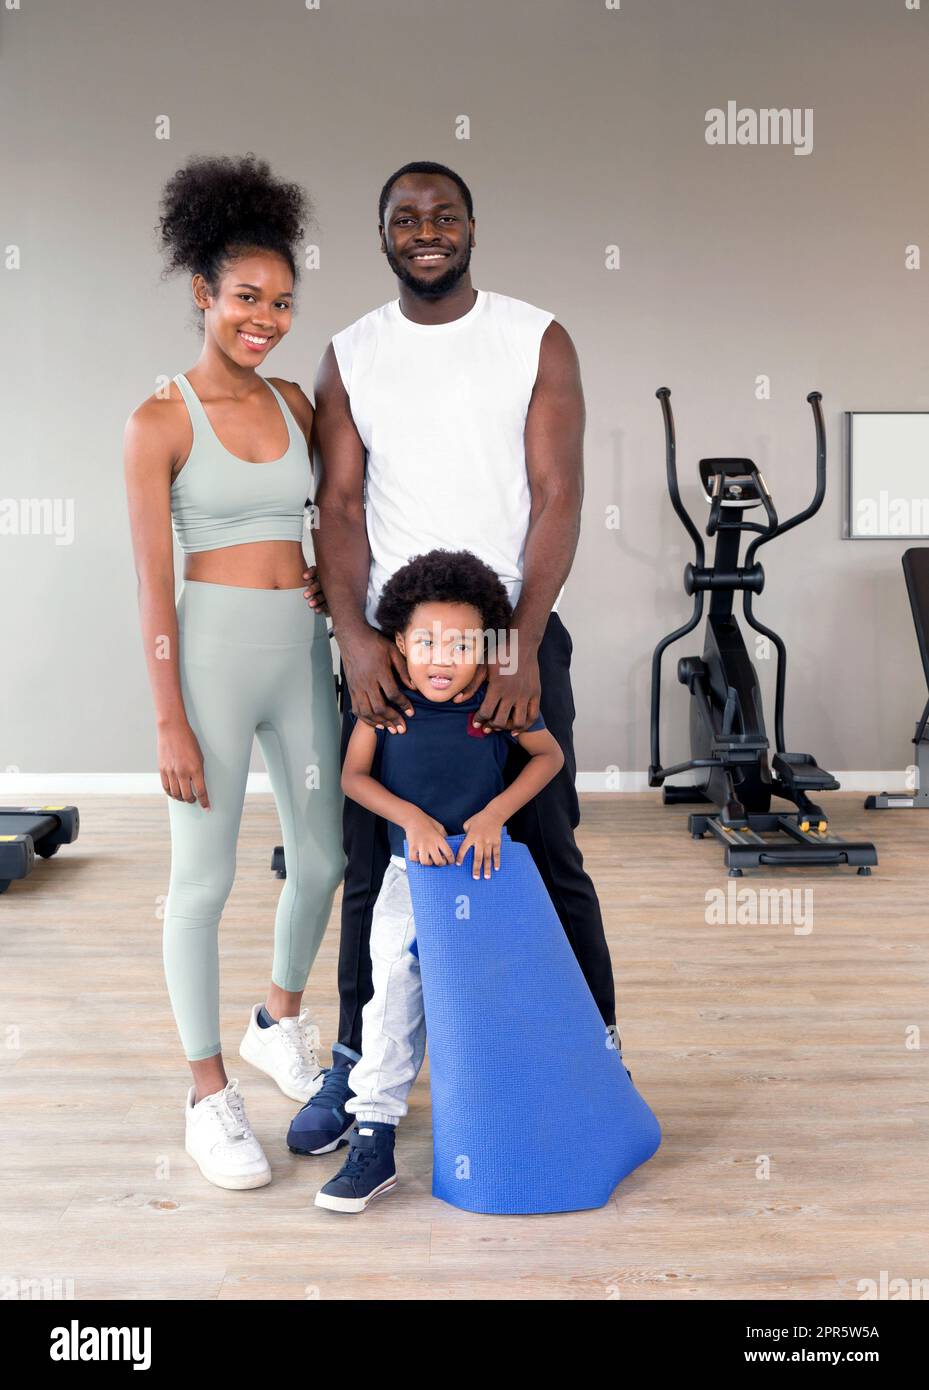 Happy family enjoy holiday together in fitness center. Young father hold his son shoulder while the boy try to play with yoga mat. Stock Photo